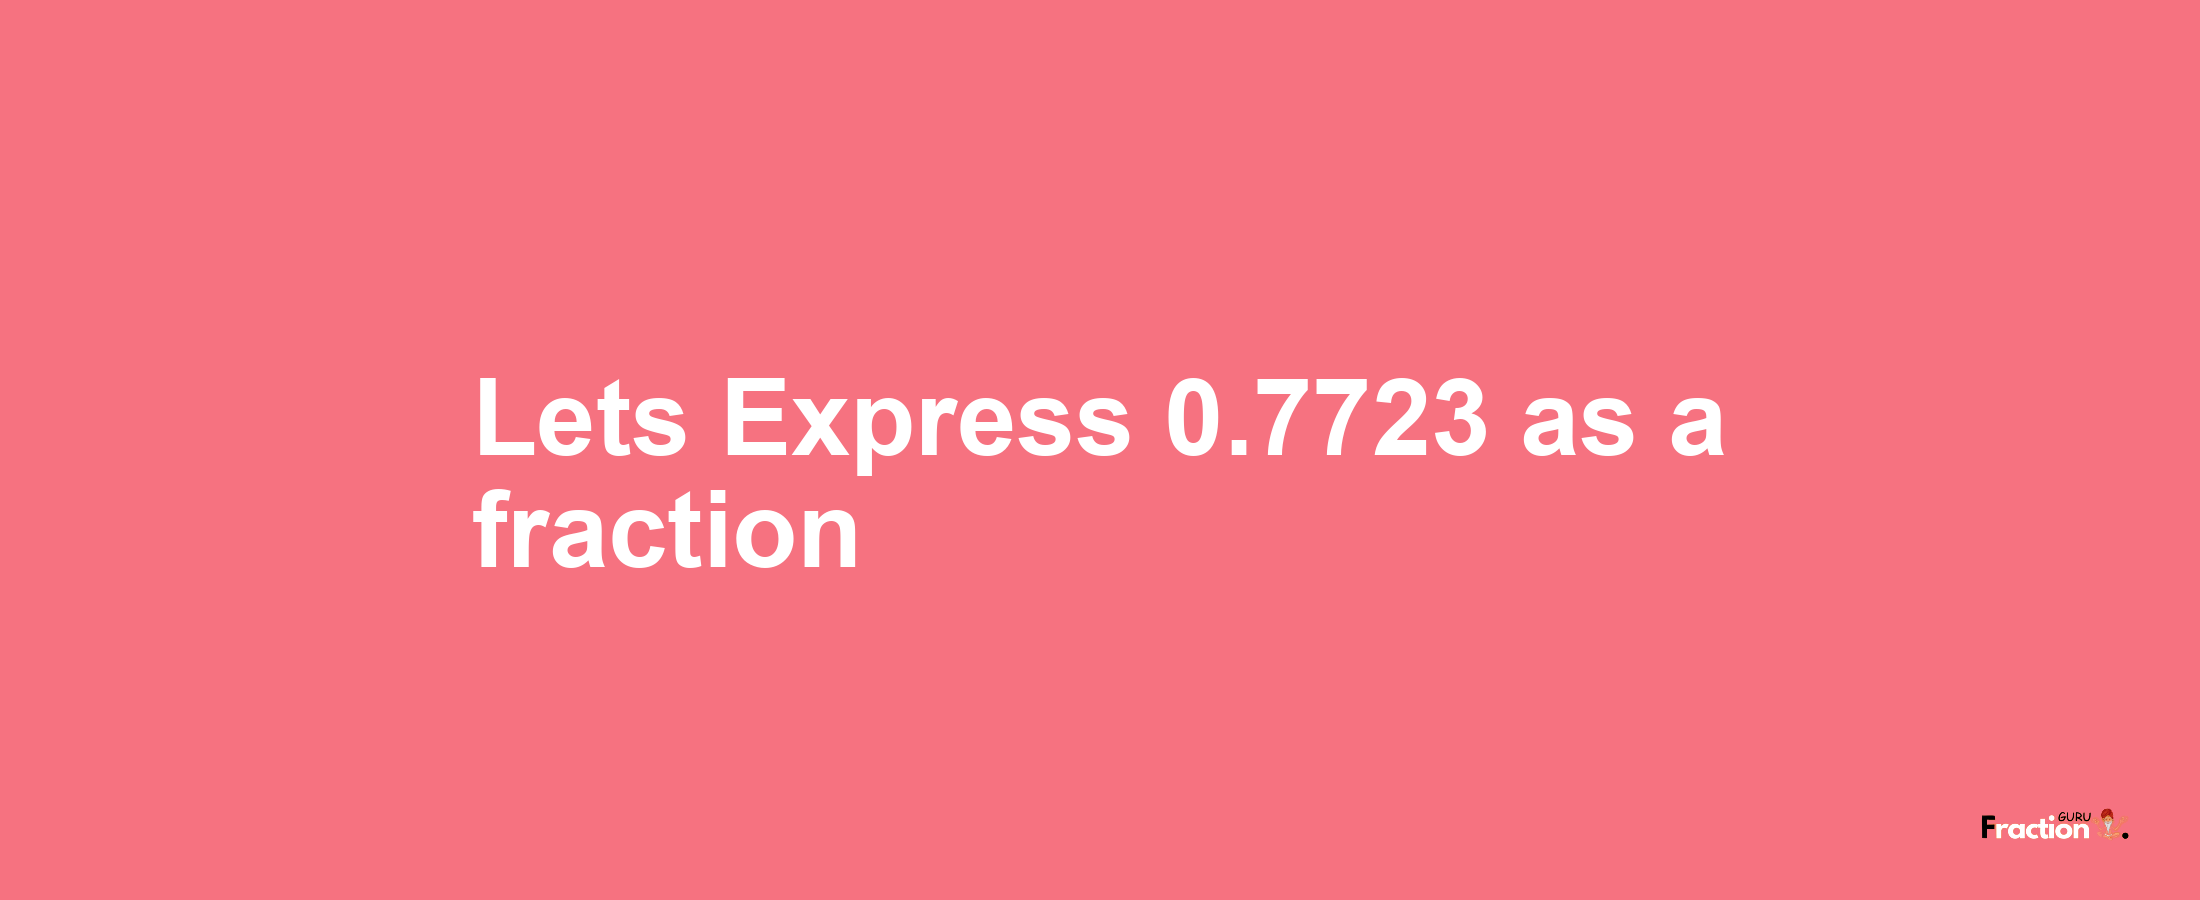 Lets Express 0.7723 as afraction